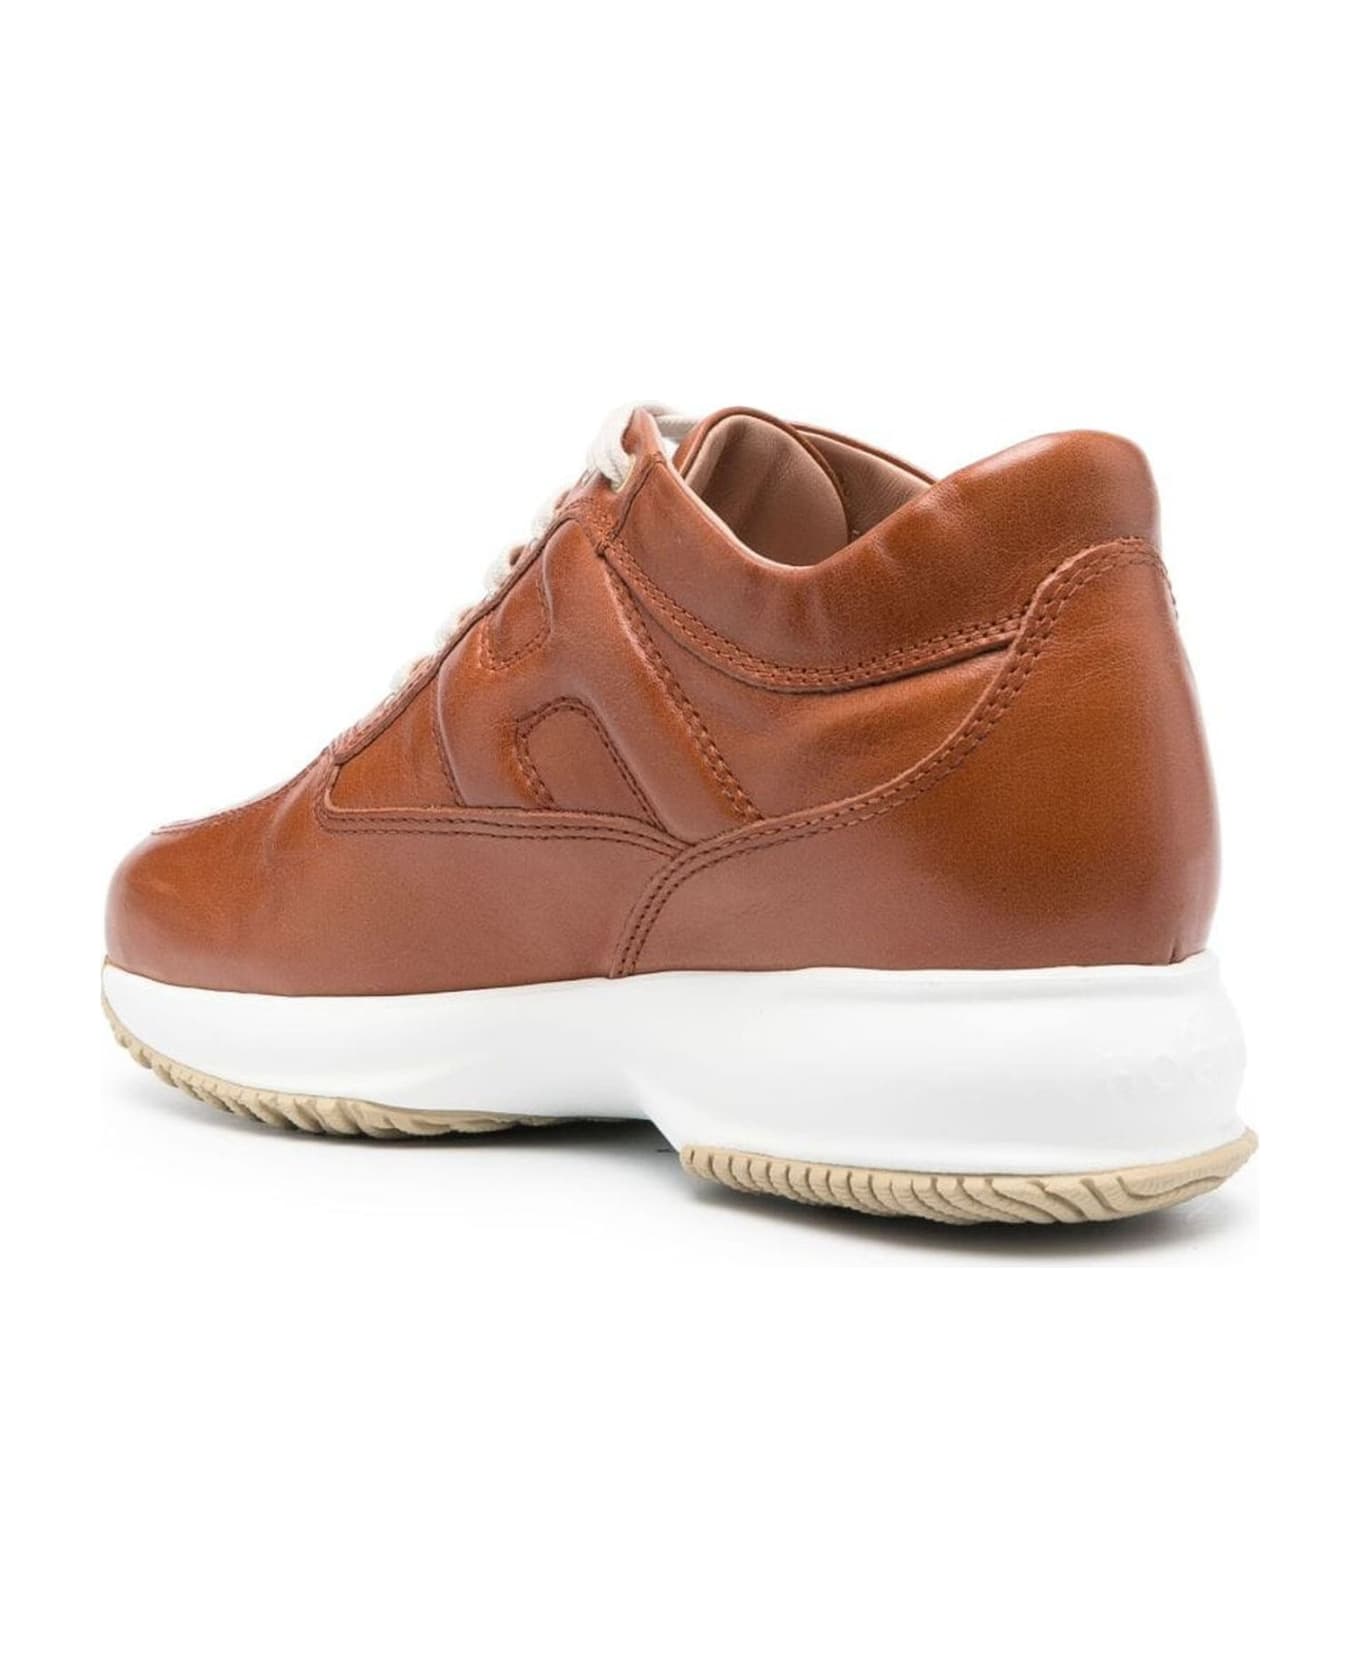 Hogan Interactive Lace-up Sneakers - Marrone スニーカー